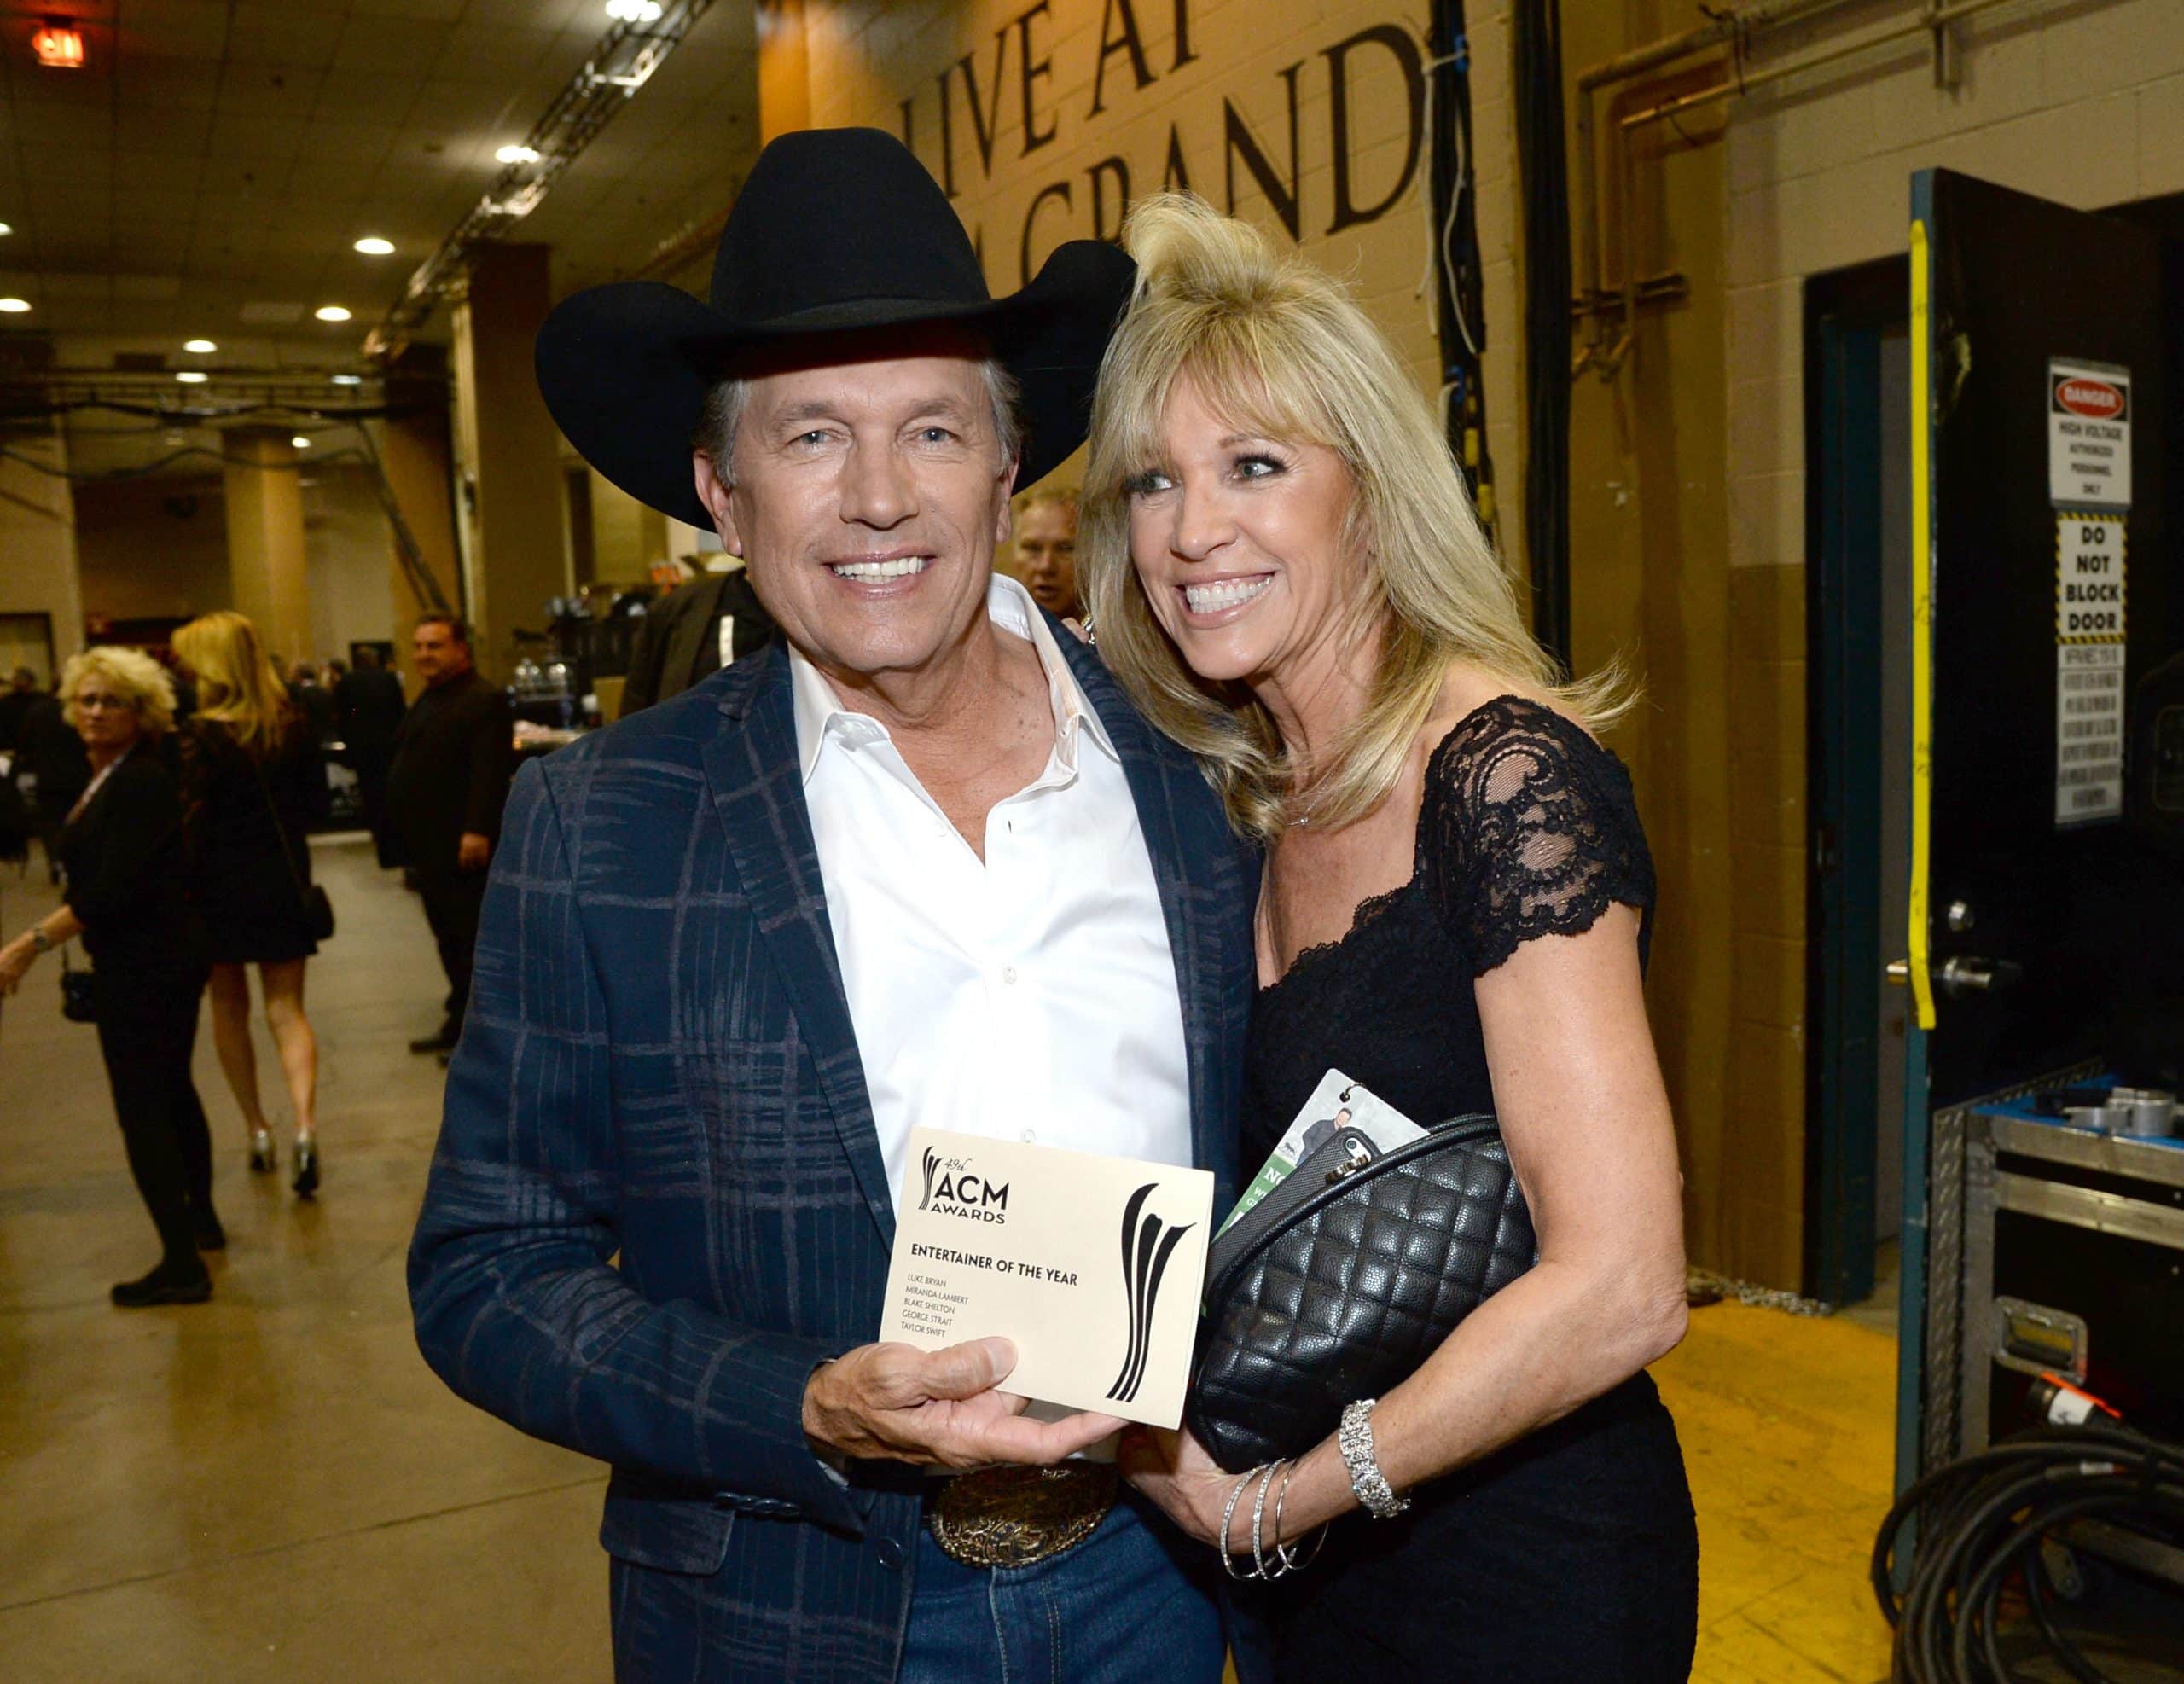 George Strait's wife, Norma, attends the 49th ACM Awards with him